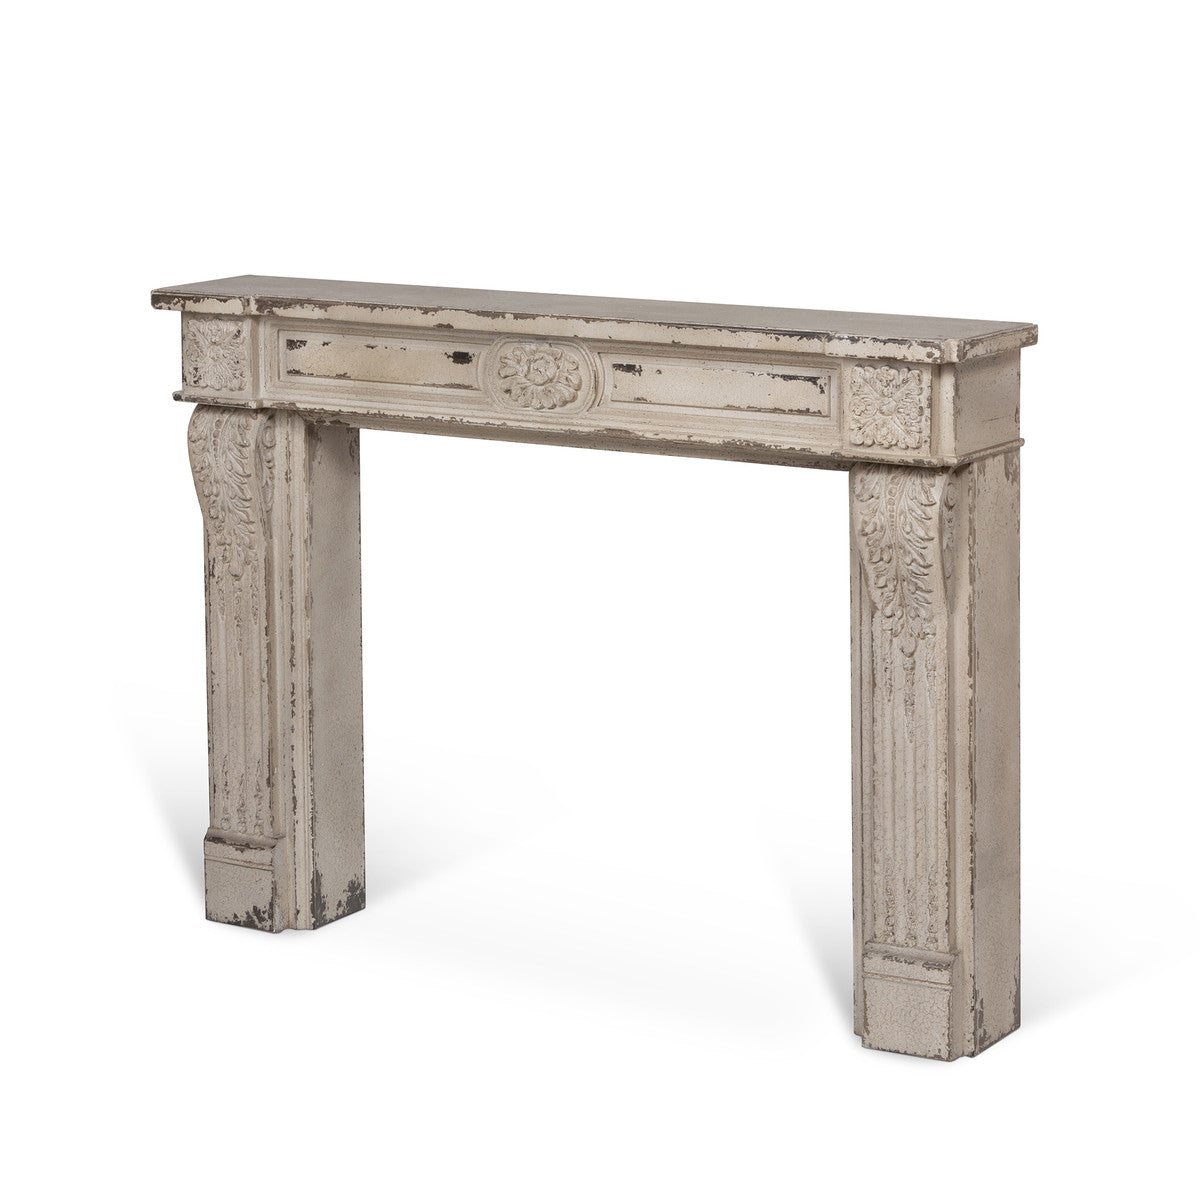 Antique White Fireplace Mantel for sale, Vintage Fireplace Surround for sale